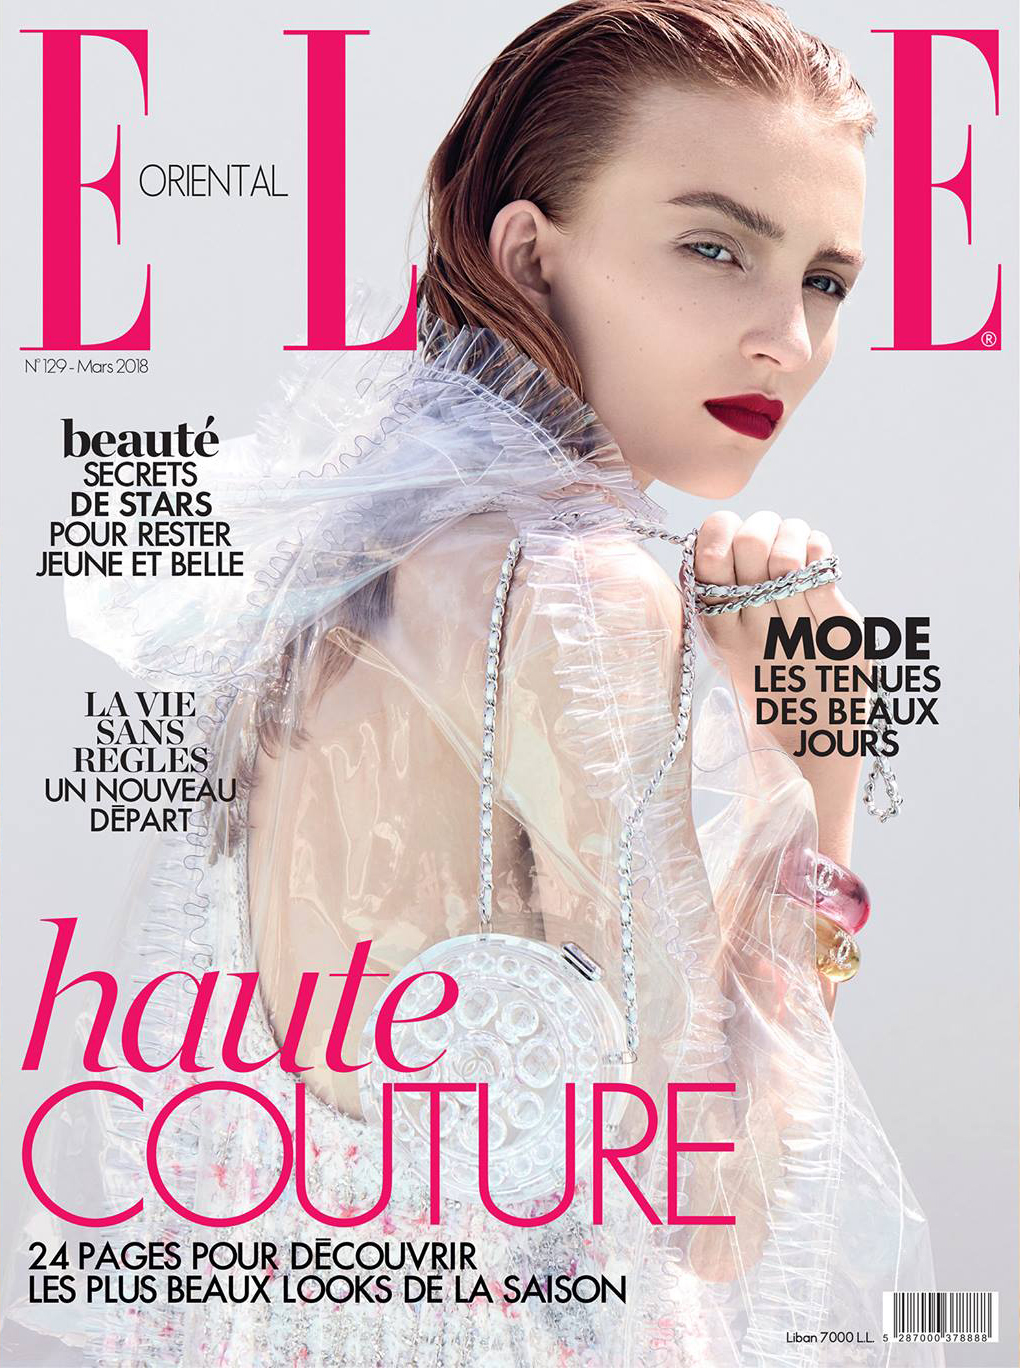 Nicole for Chanel on ELLE Cover on Behance